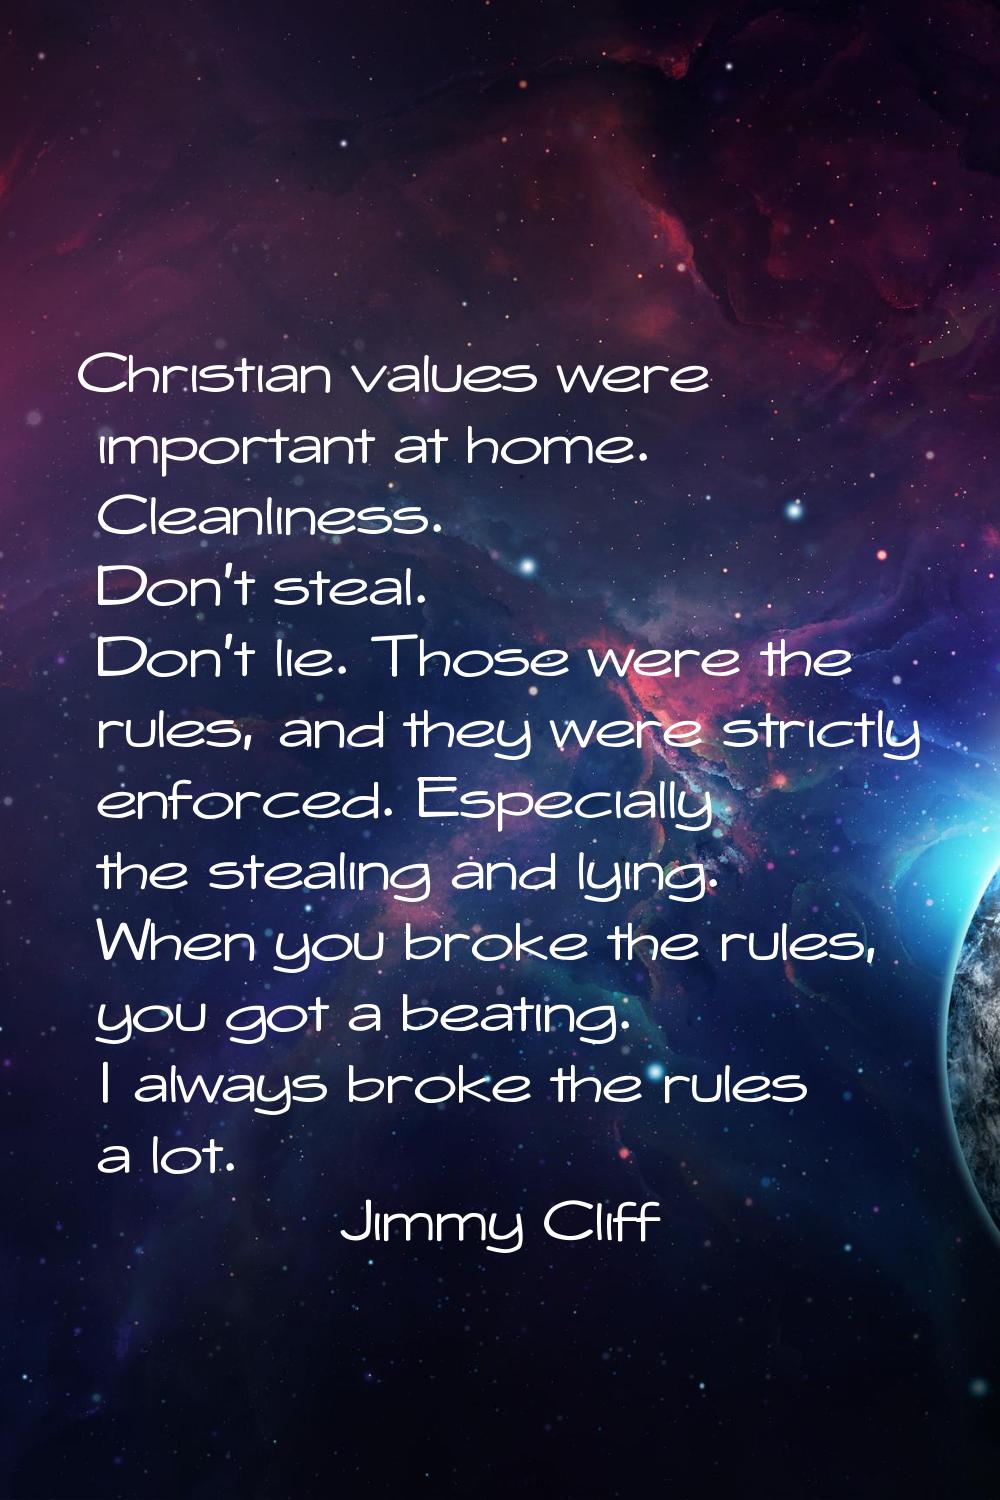 Christian values were important at home. Cleanliness. Don't steal. Don't lie. Those were the rules,